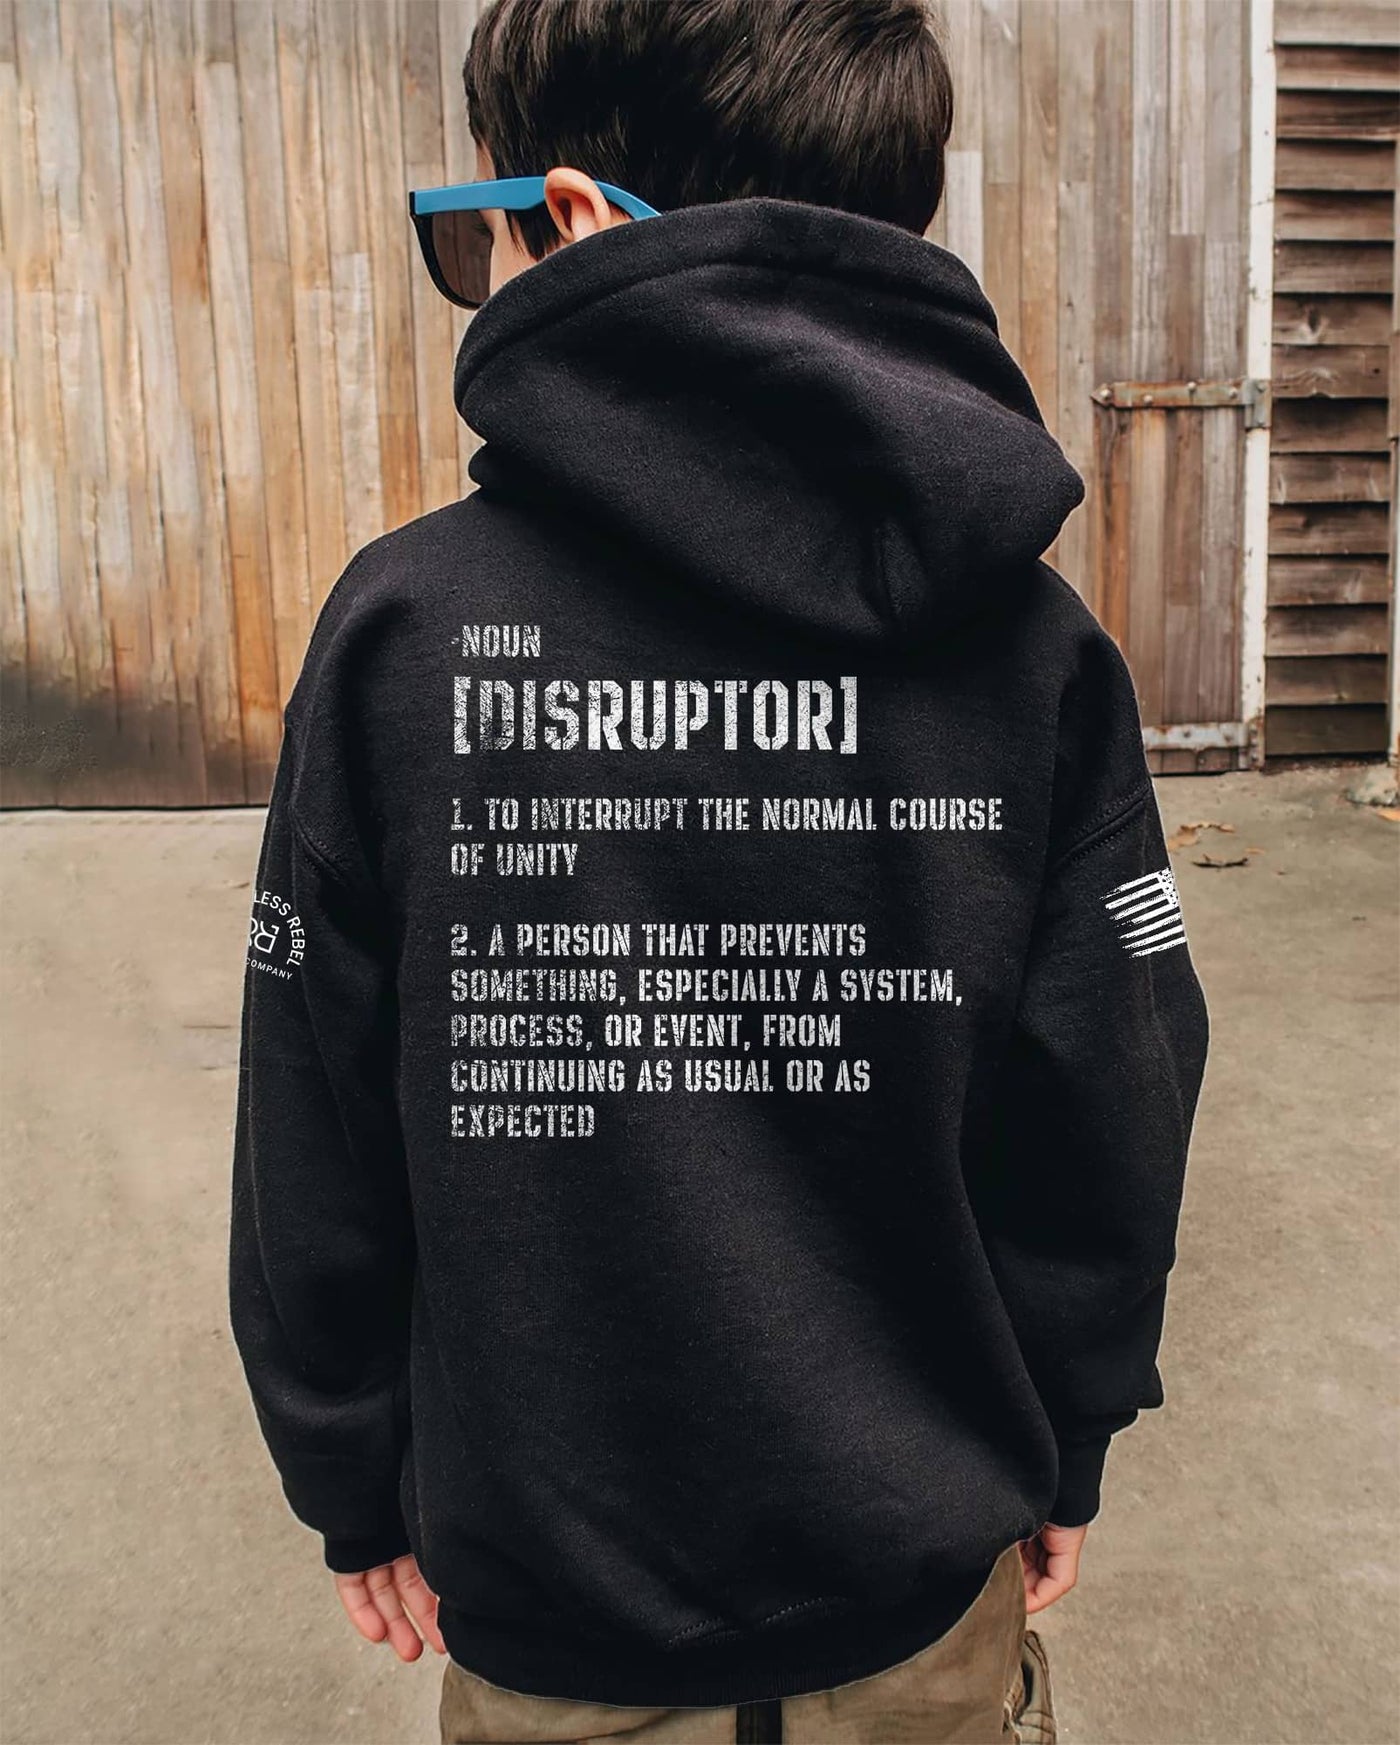 Boy wearing Solid Black The Disruptor Back Design Youth Hoodie